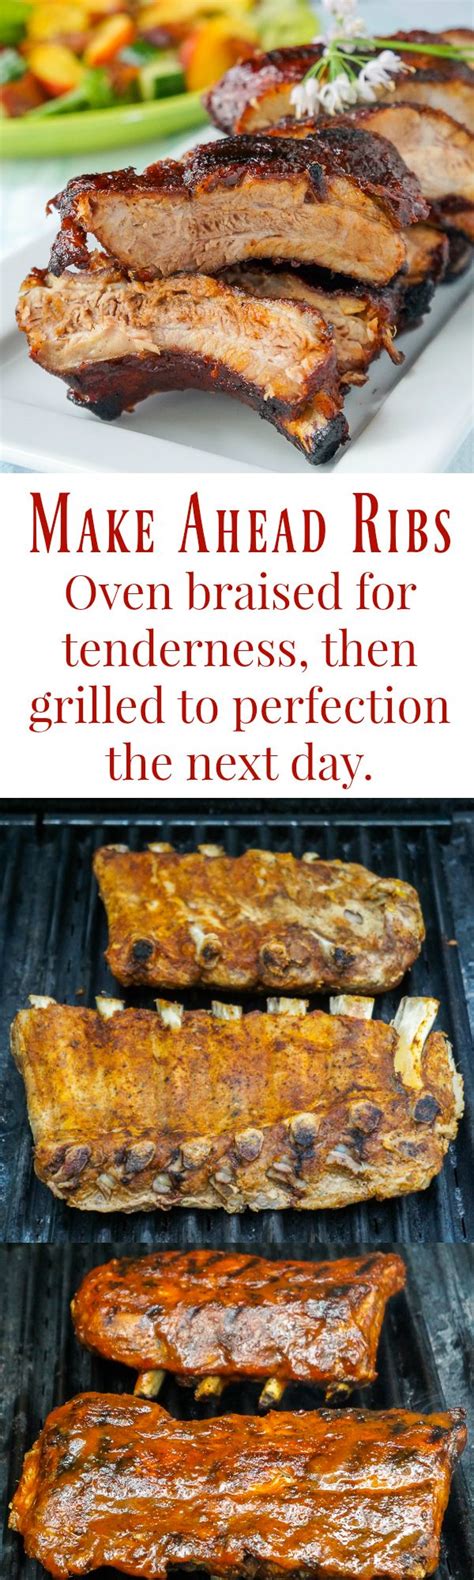 Pop these bad boys in the oven, cover with foil, and let them cook, tenderize, and fill your house with the most delicious smell imaginable. Make Ahead Ribs - braised, then grilled | Recipe | Food ...